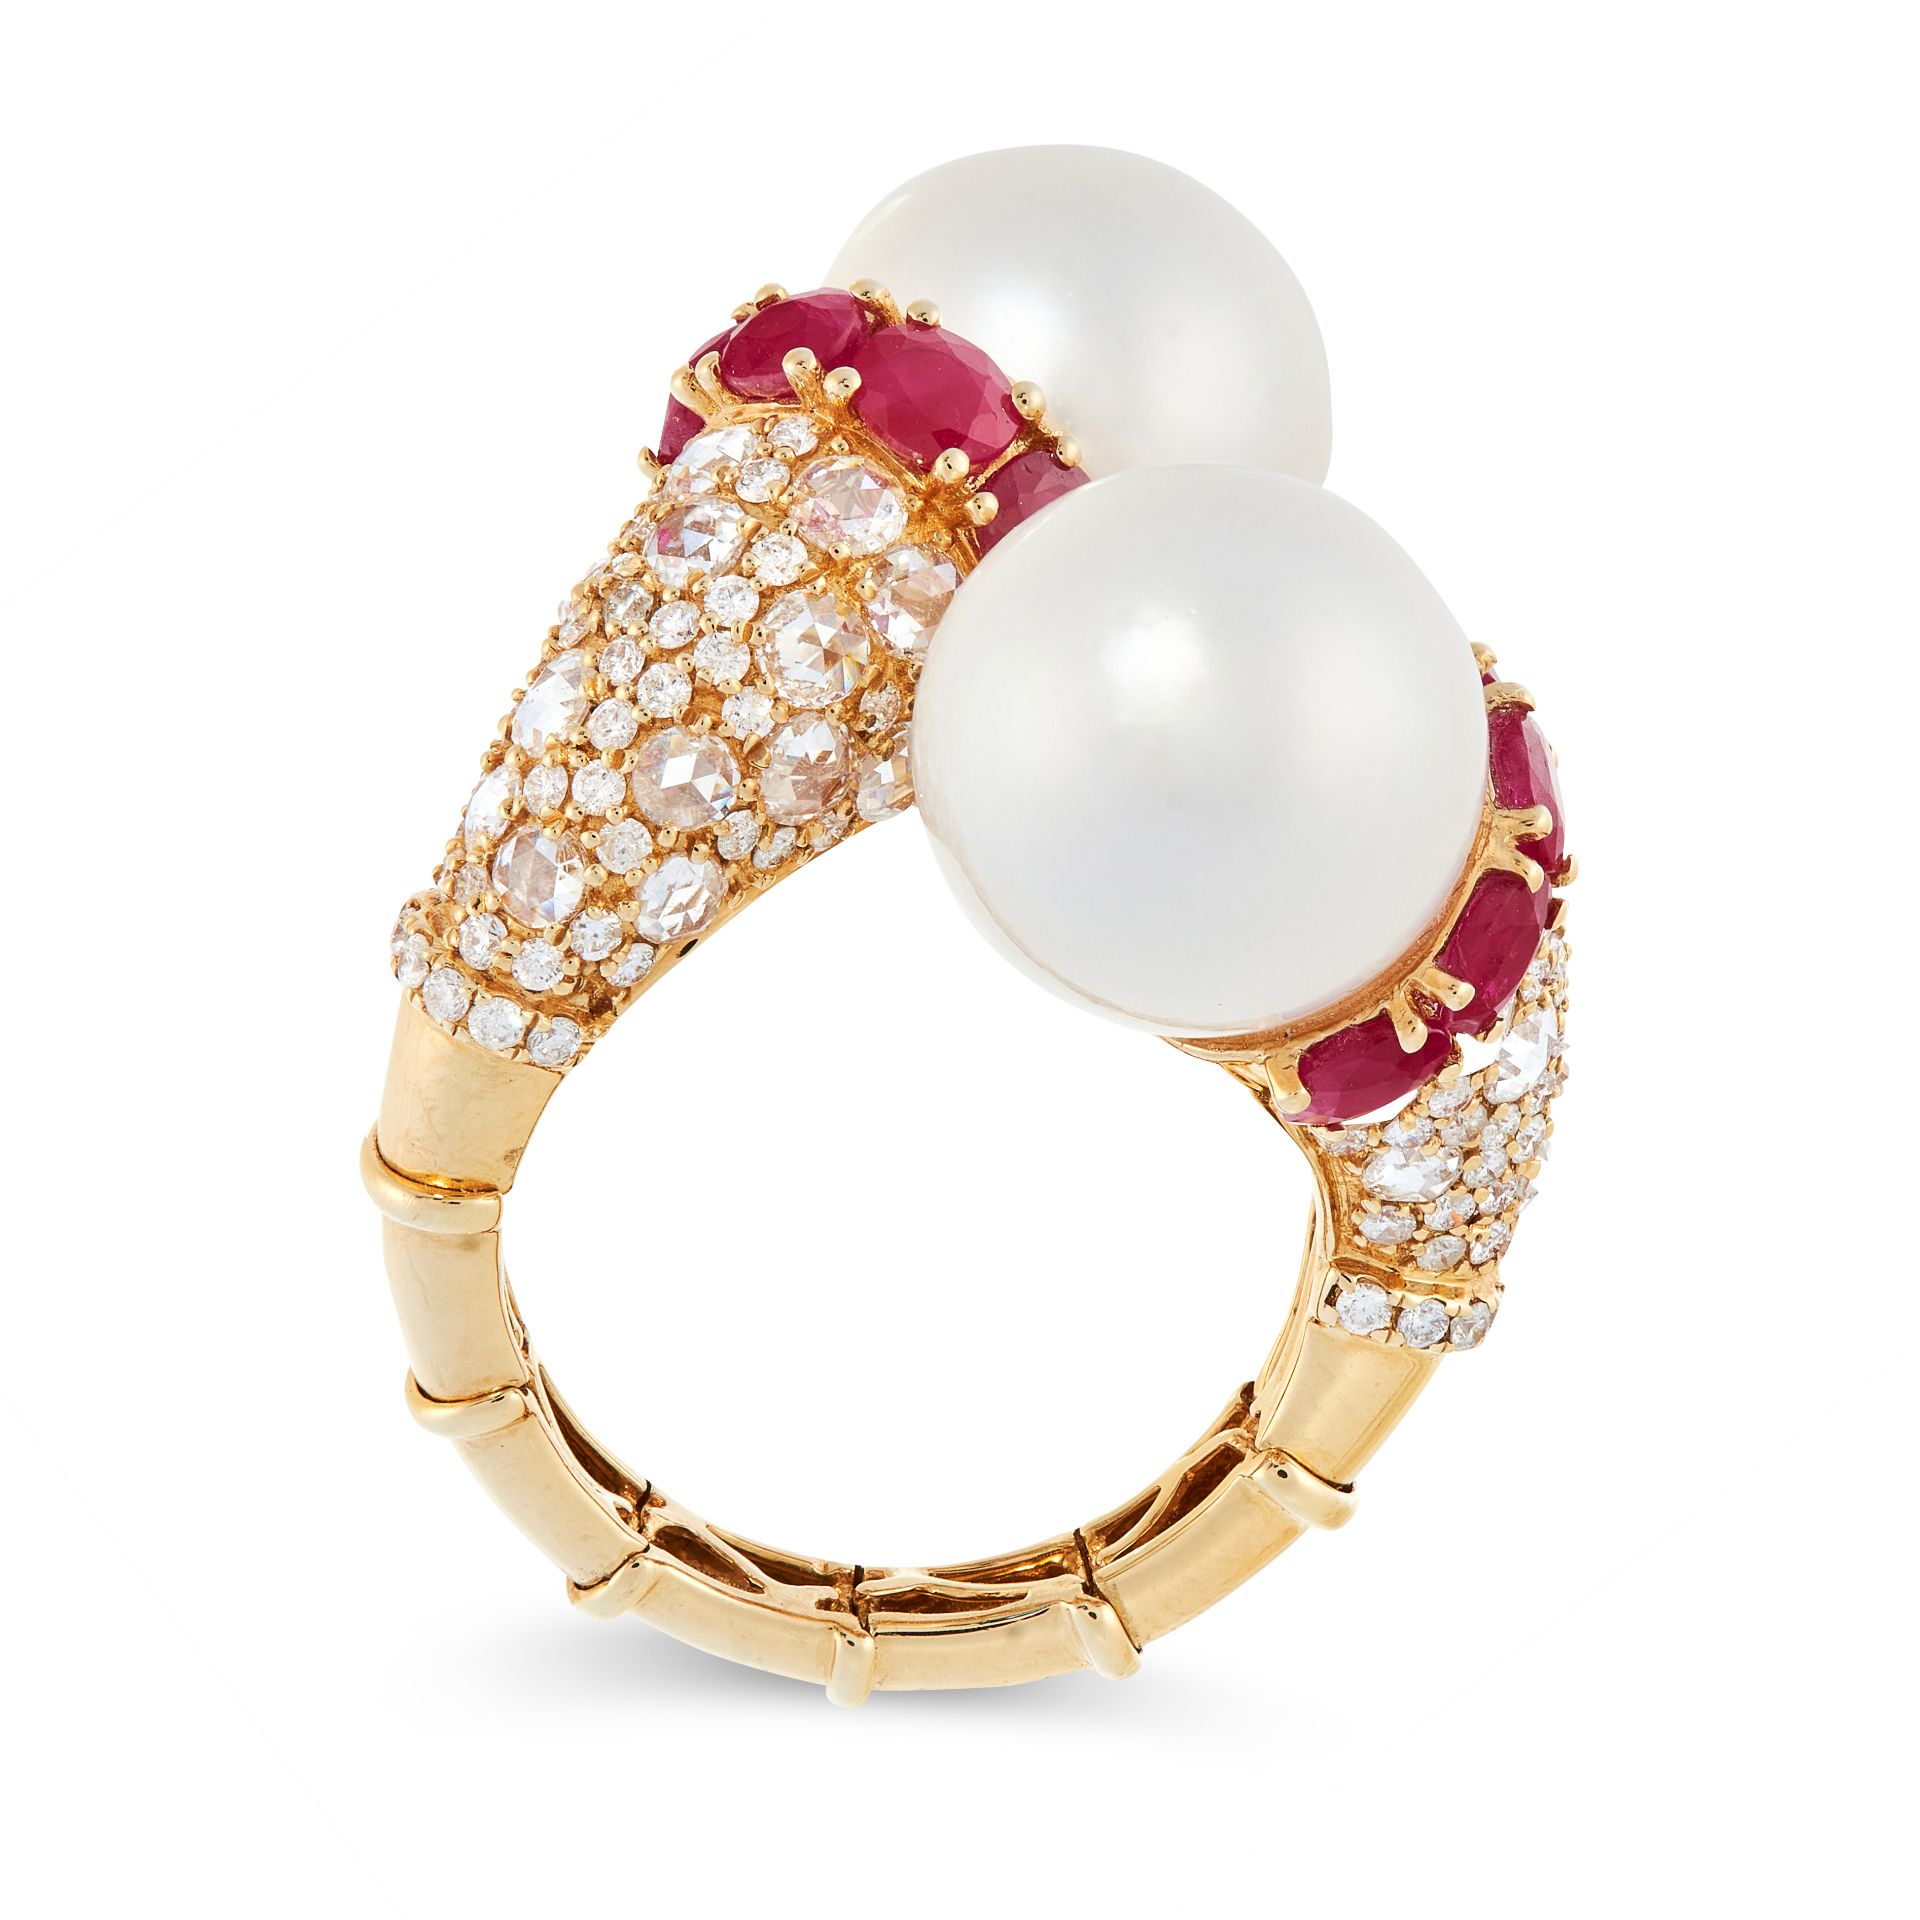 A PEARL, RUBY AND DIAMOND CROSSOVER RING each end is set with a pearl, in a border of oval cut